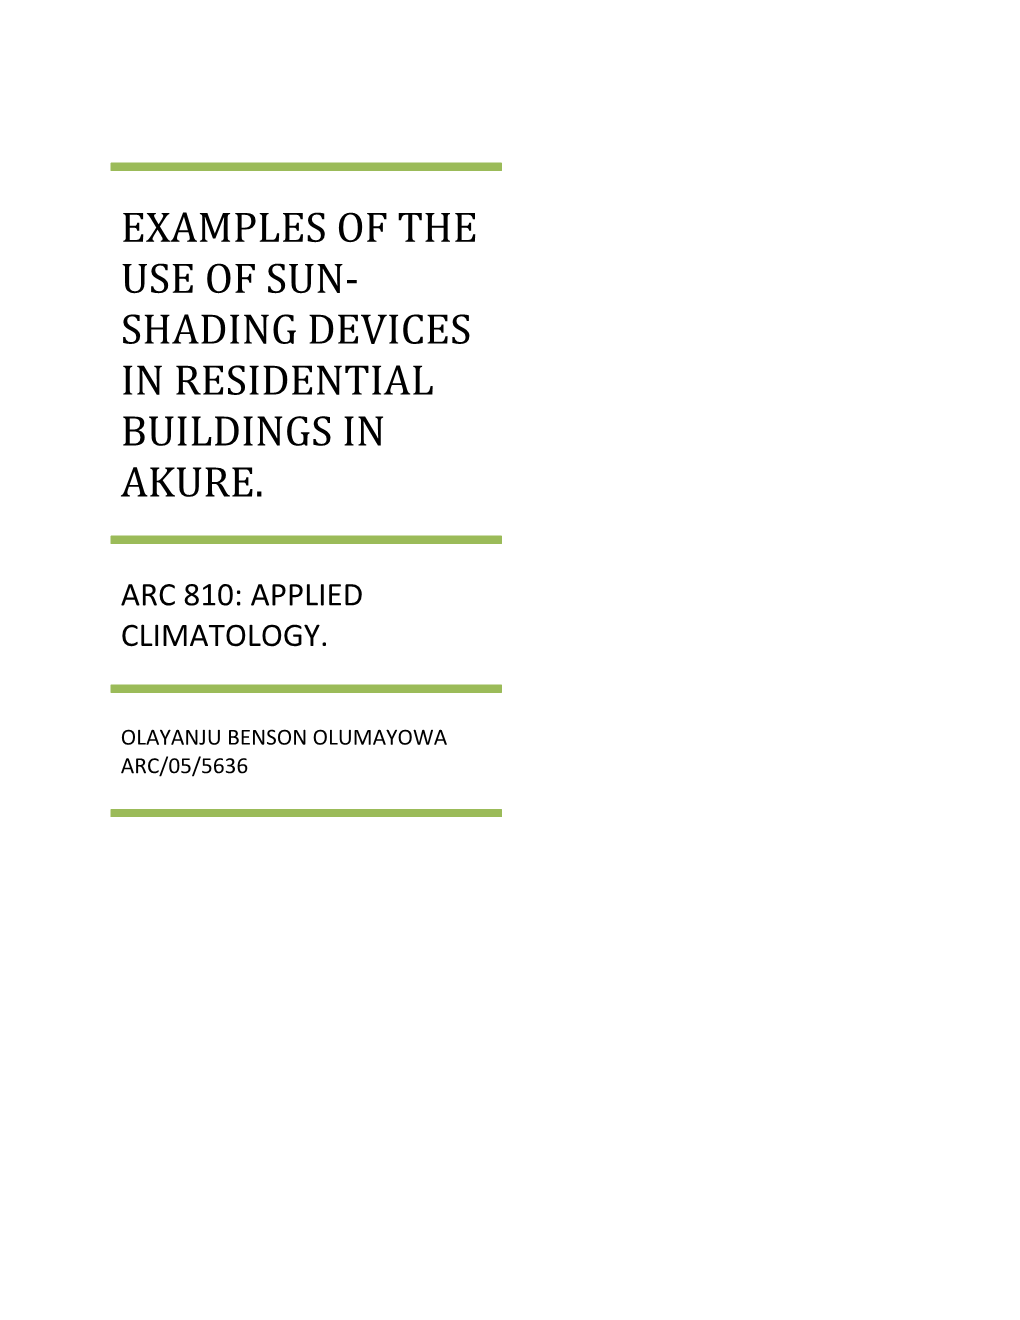 This Paper Attempts to Relate the Examples of Shading Devices in Residential Buildings